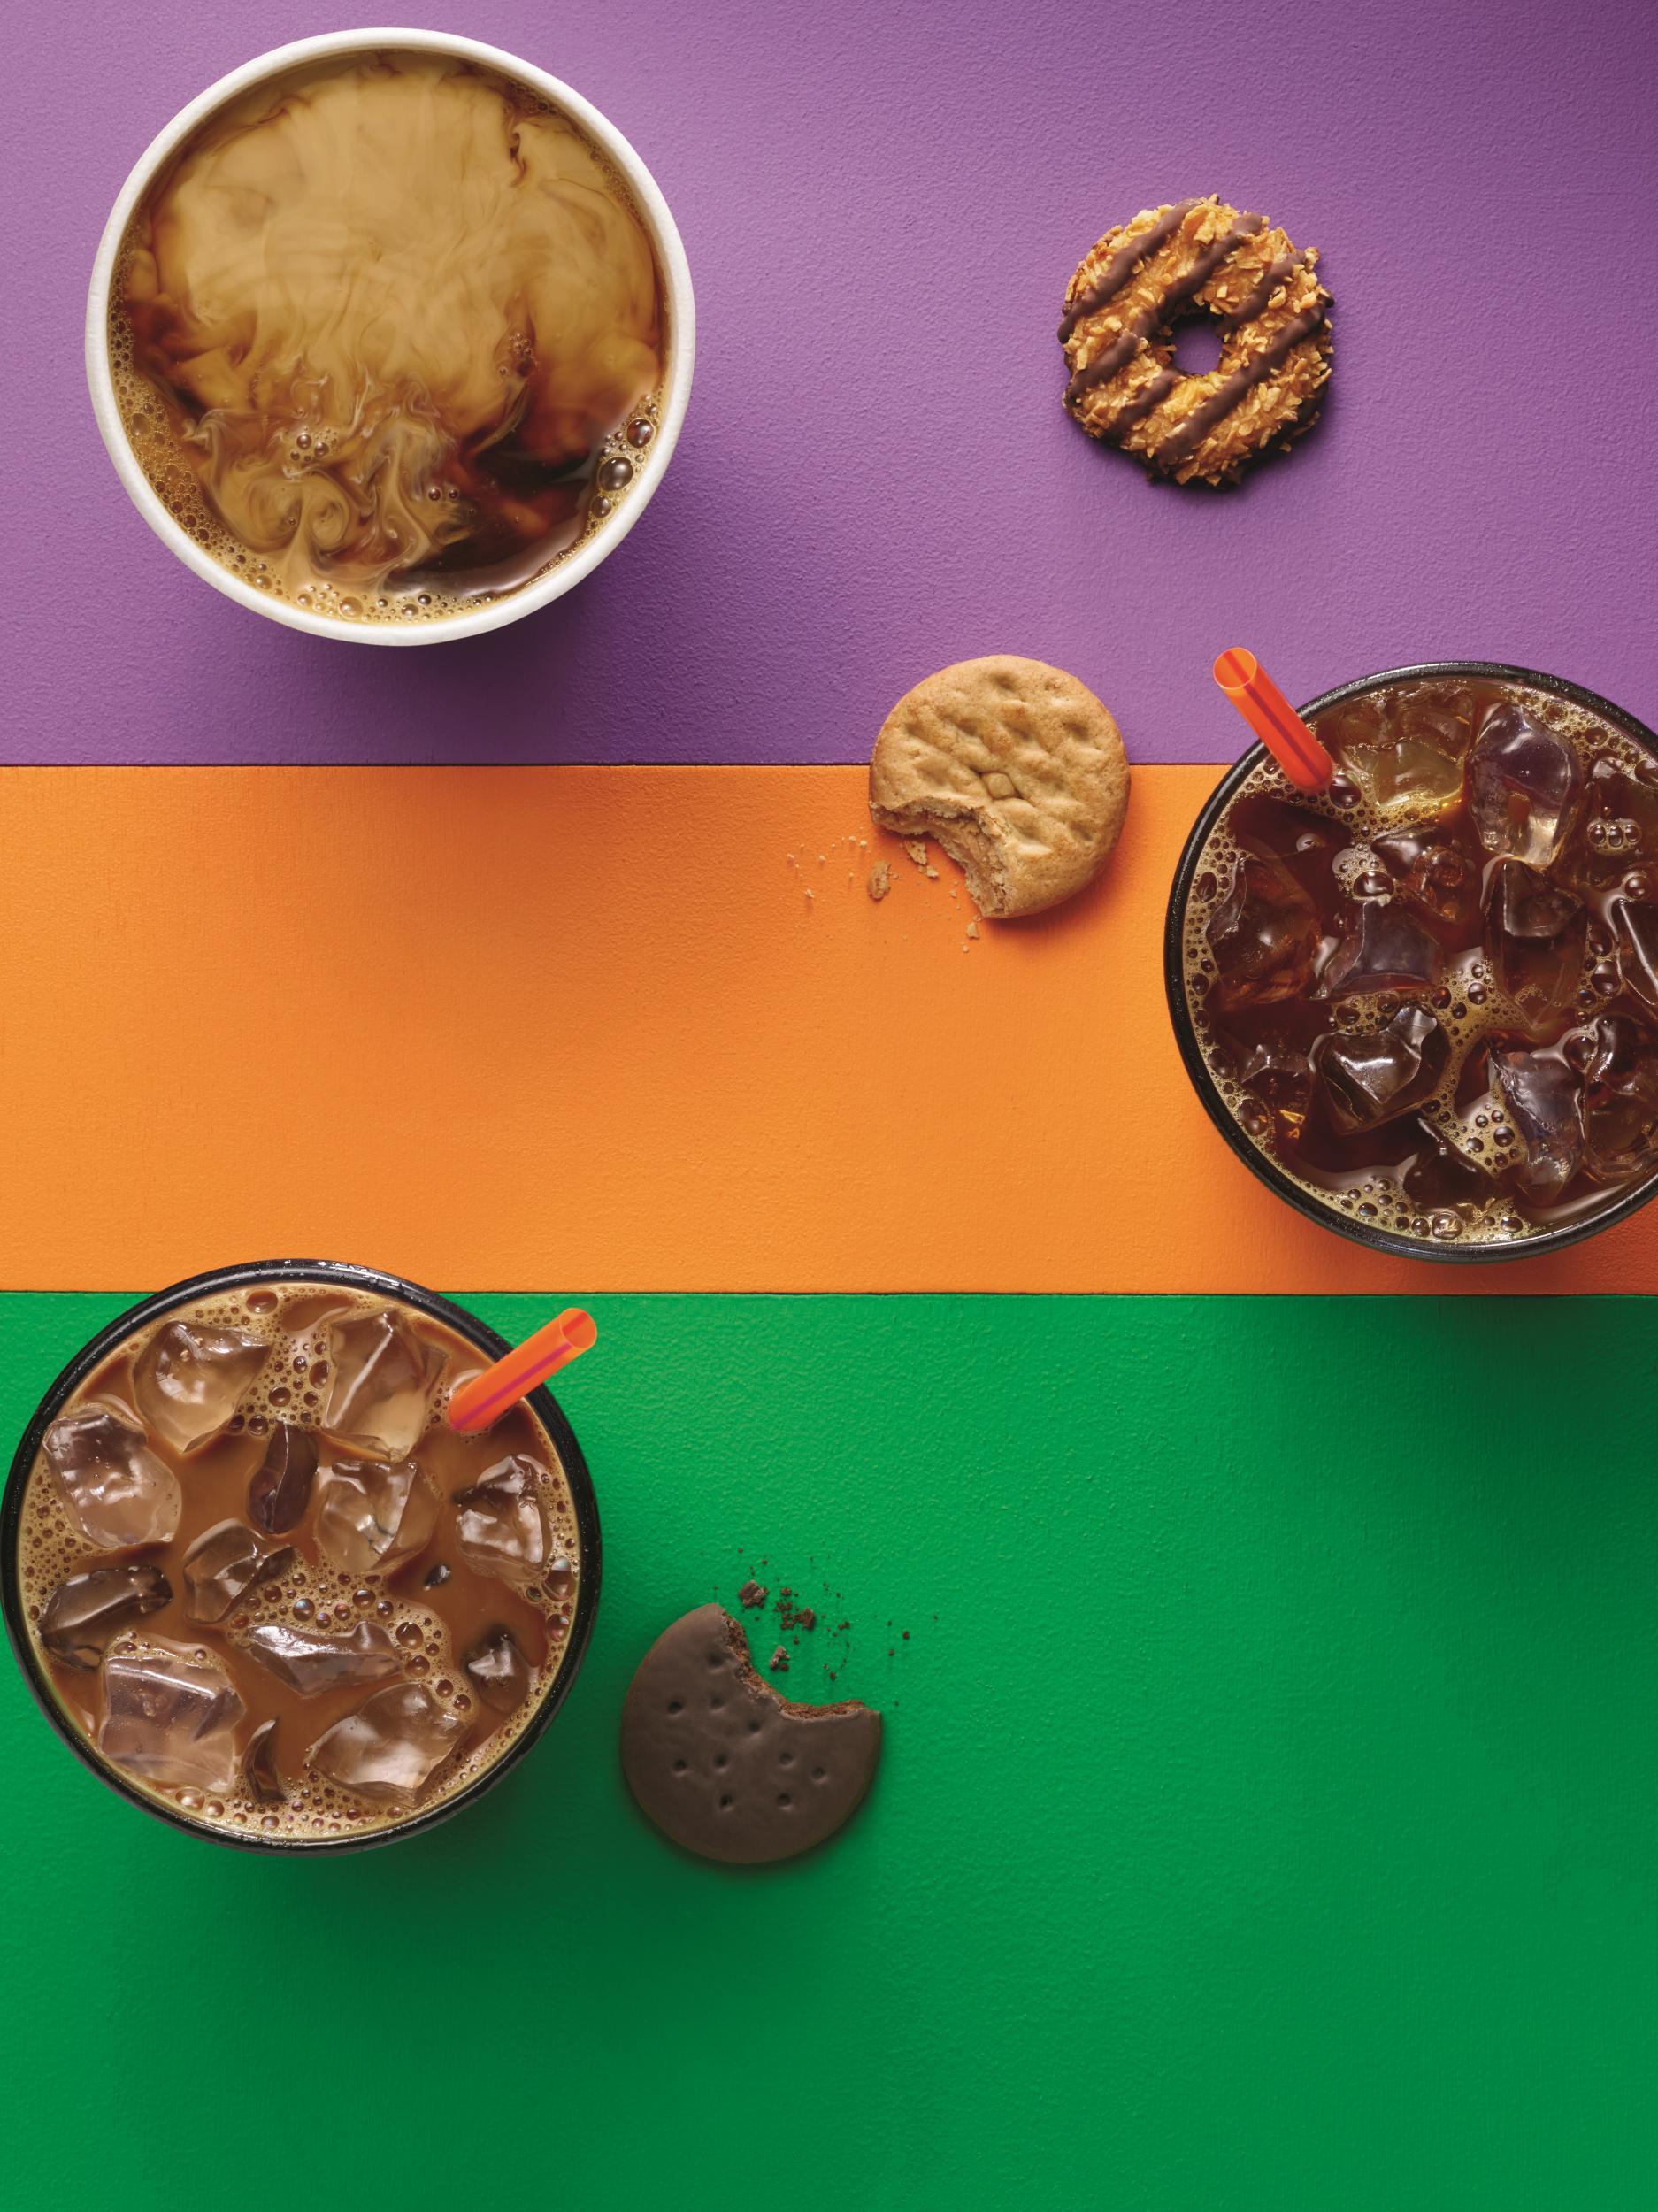 Dunkin' Donuts has created coffee inspired by Girl Scout Cookies (Dunkin' Donuts)